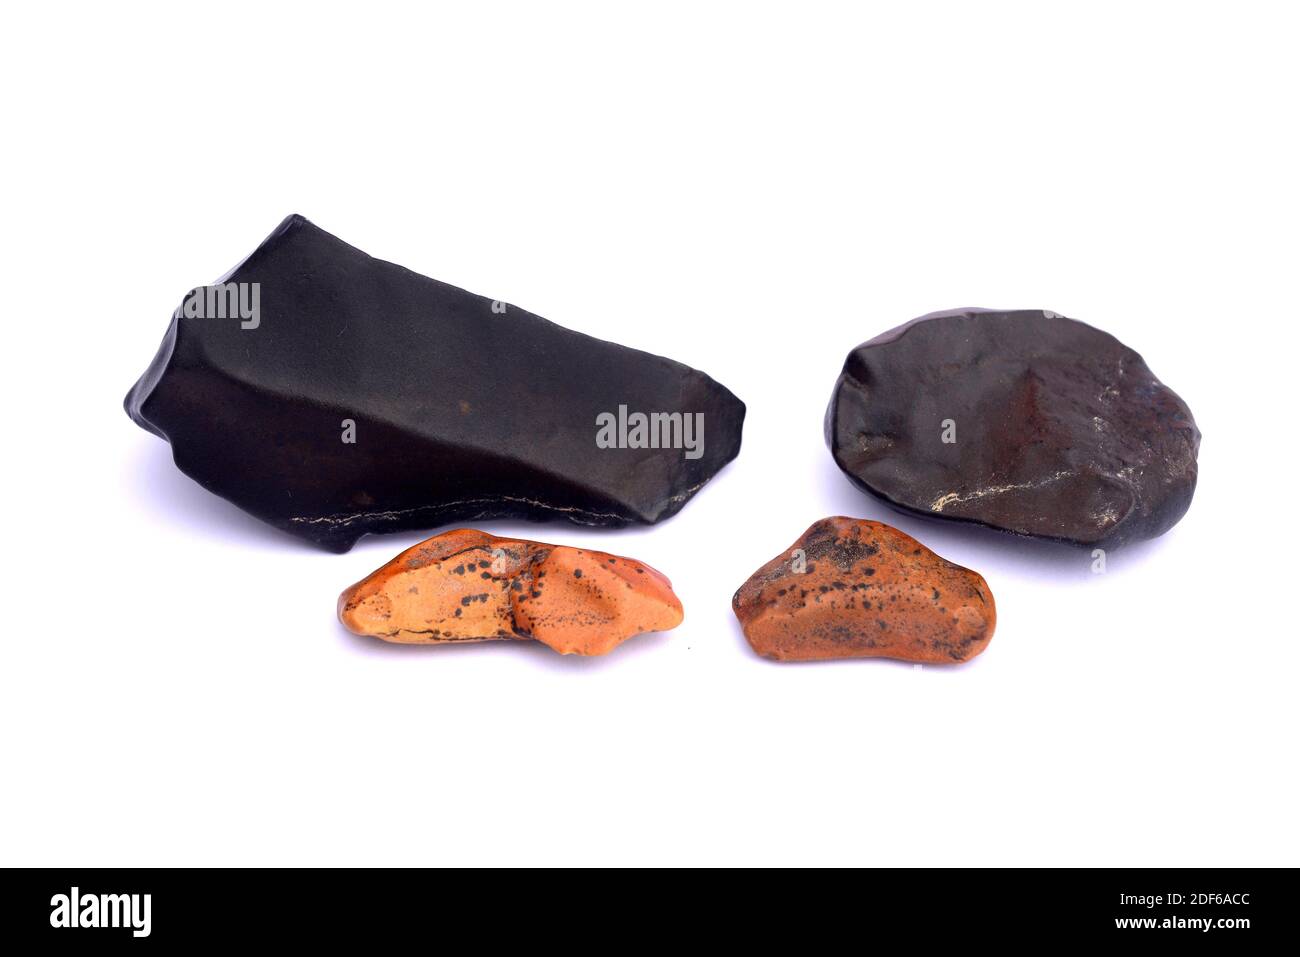 Ventifact are rocks that have been polished by sand driven by the wind on desserts. This ventifacts are from Namib dessert (Namibia). Stock Photo